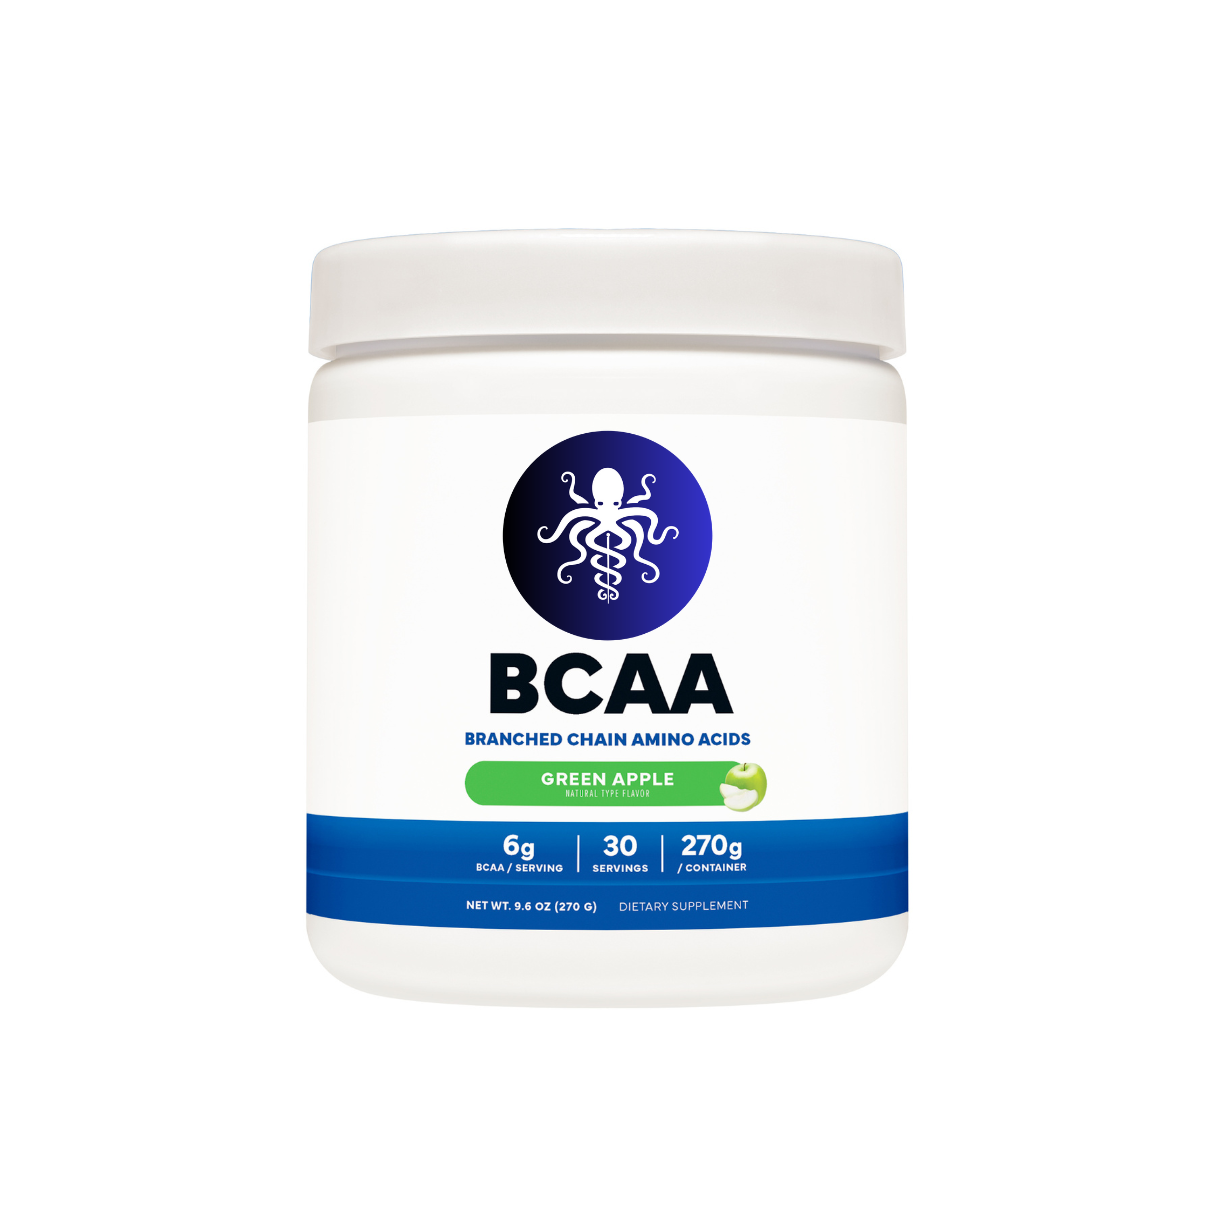 White Bottle with blue band, stating BCAA- Branched Chain Amino Acids, Green Apple Flavor, 6g BCAA/serving, 30 servings, 270g / container, net wt 9.6 oz, Dietary Supplement